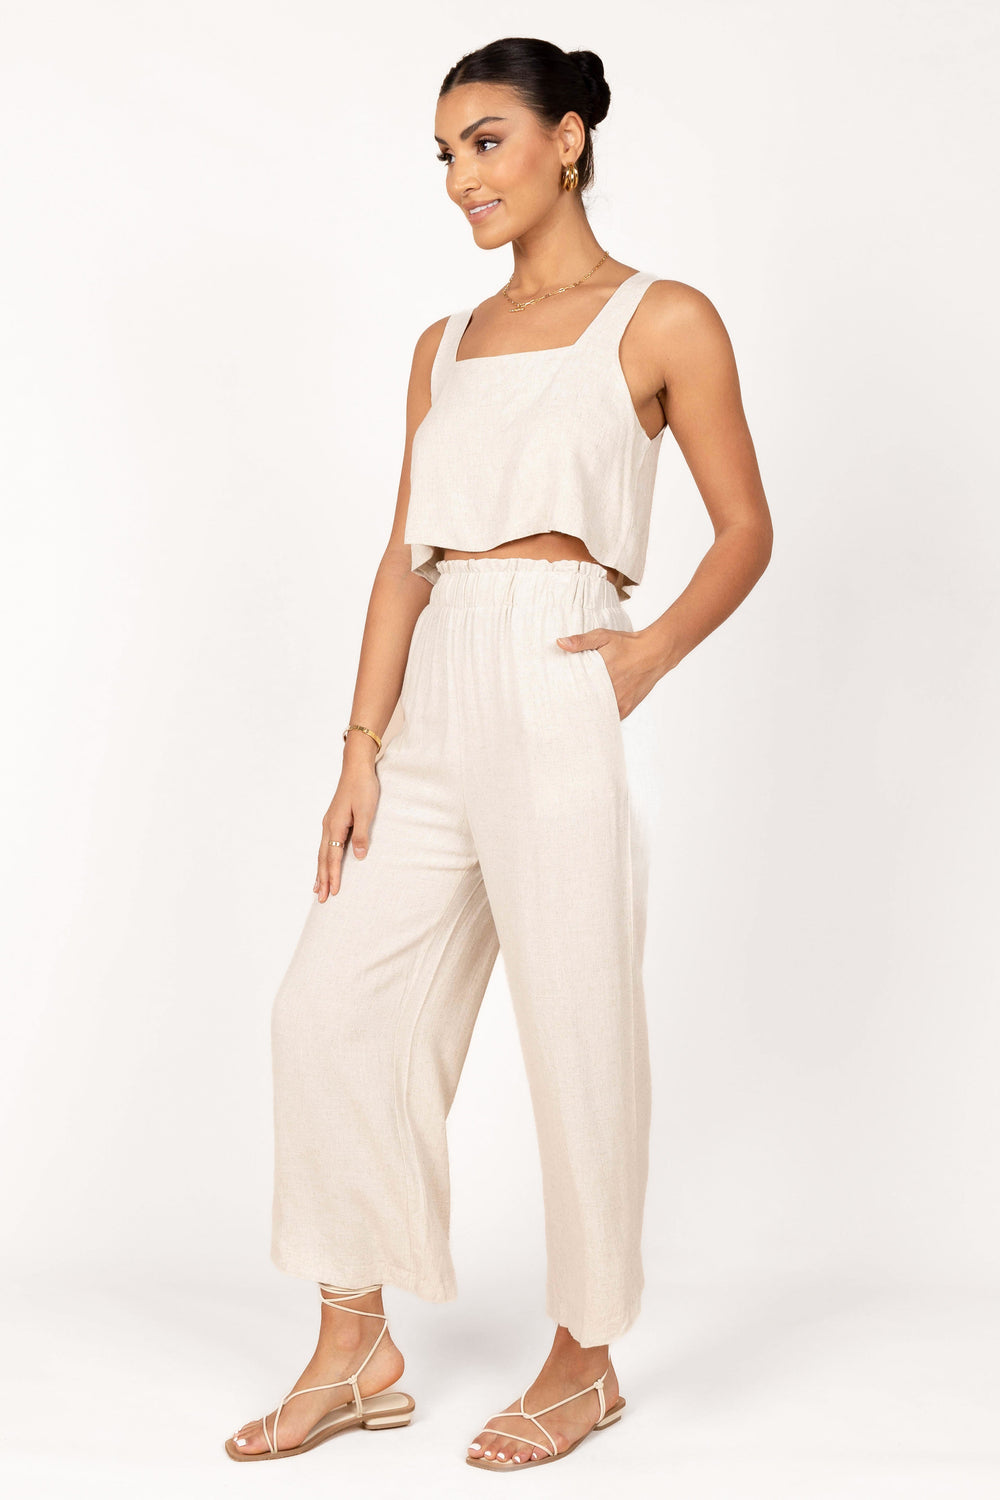 THE BEST HIGH-WAISTED TROUSERS TO HELP YOU LOOK TALLER - Eleanor